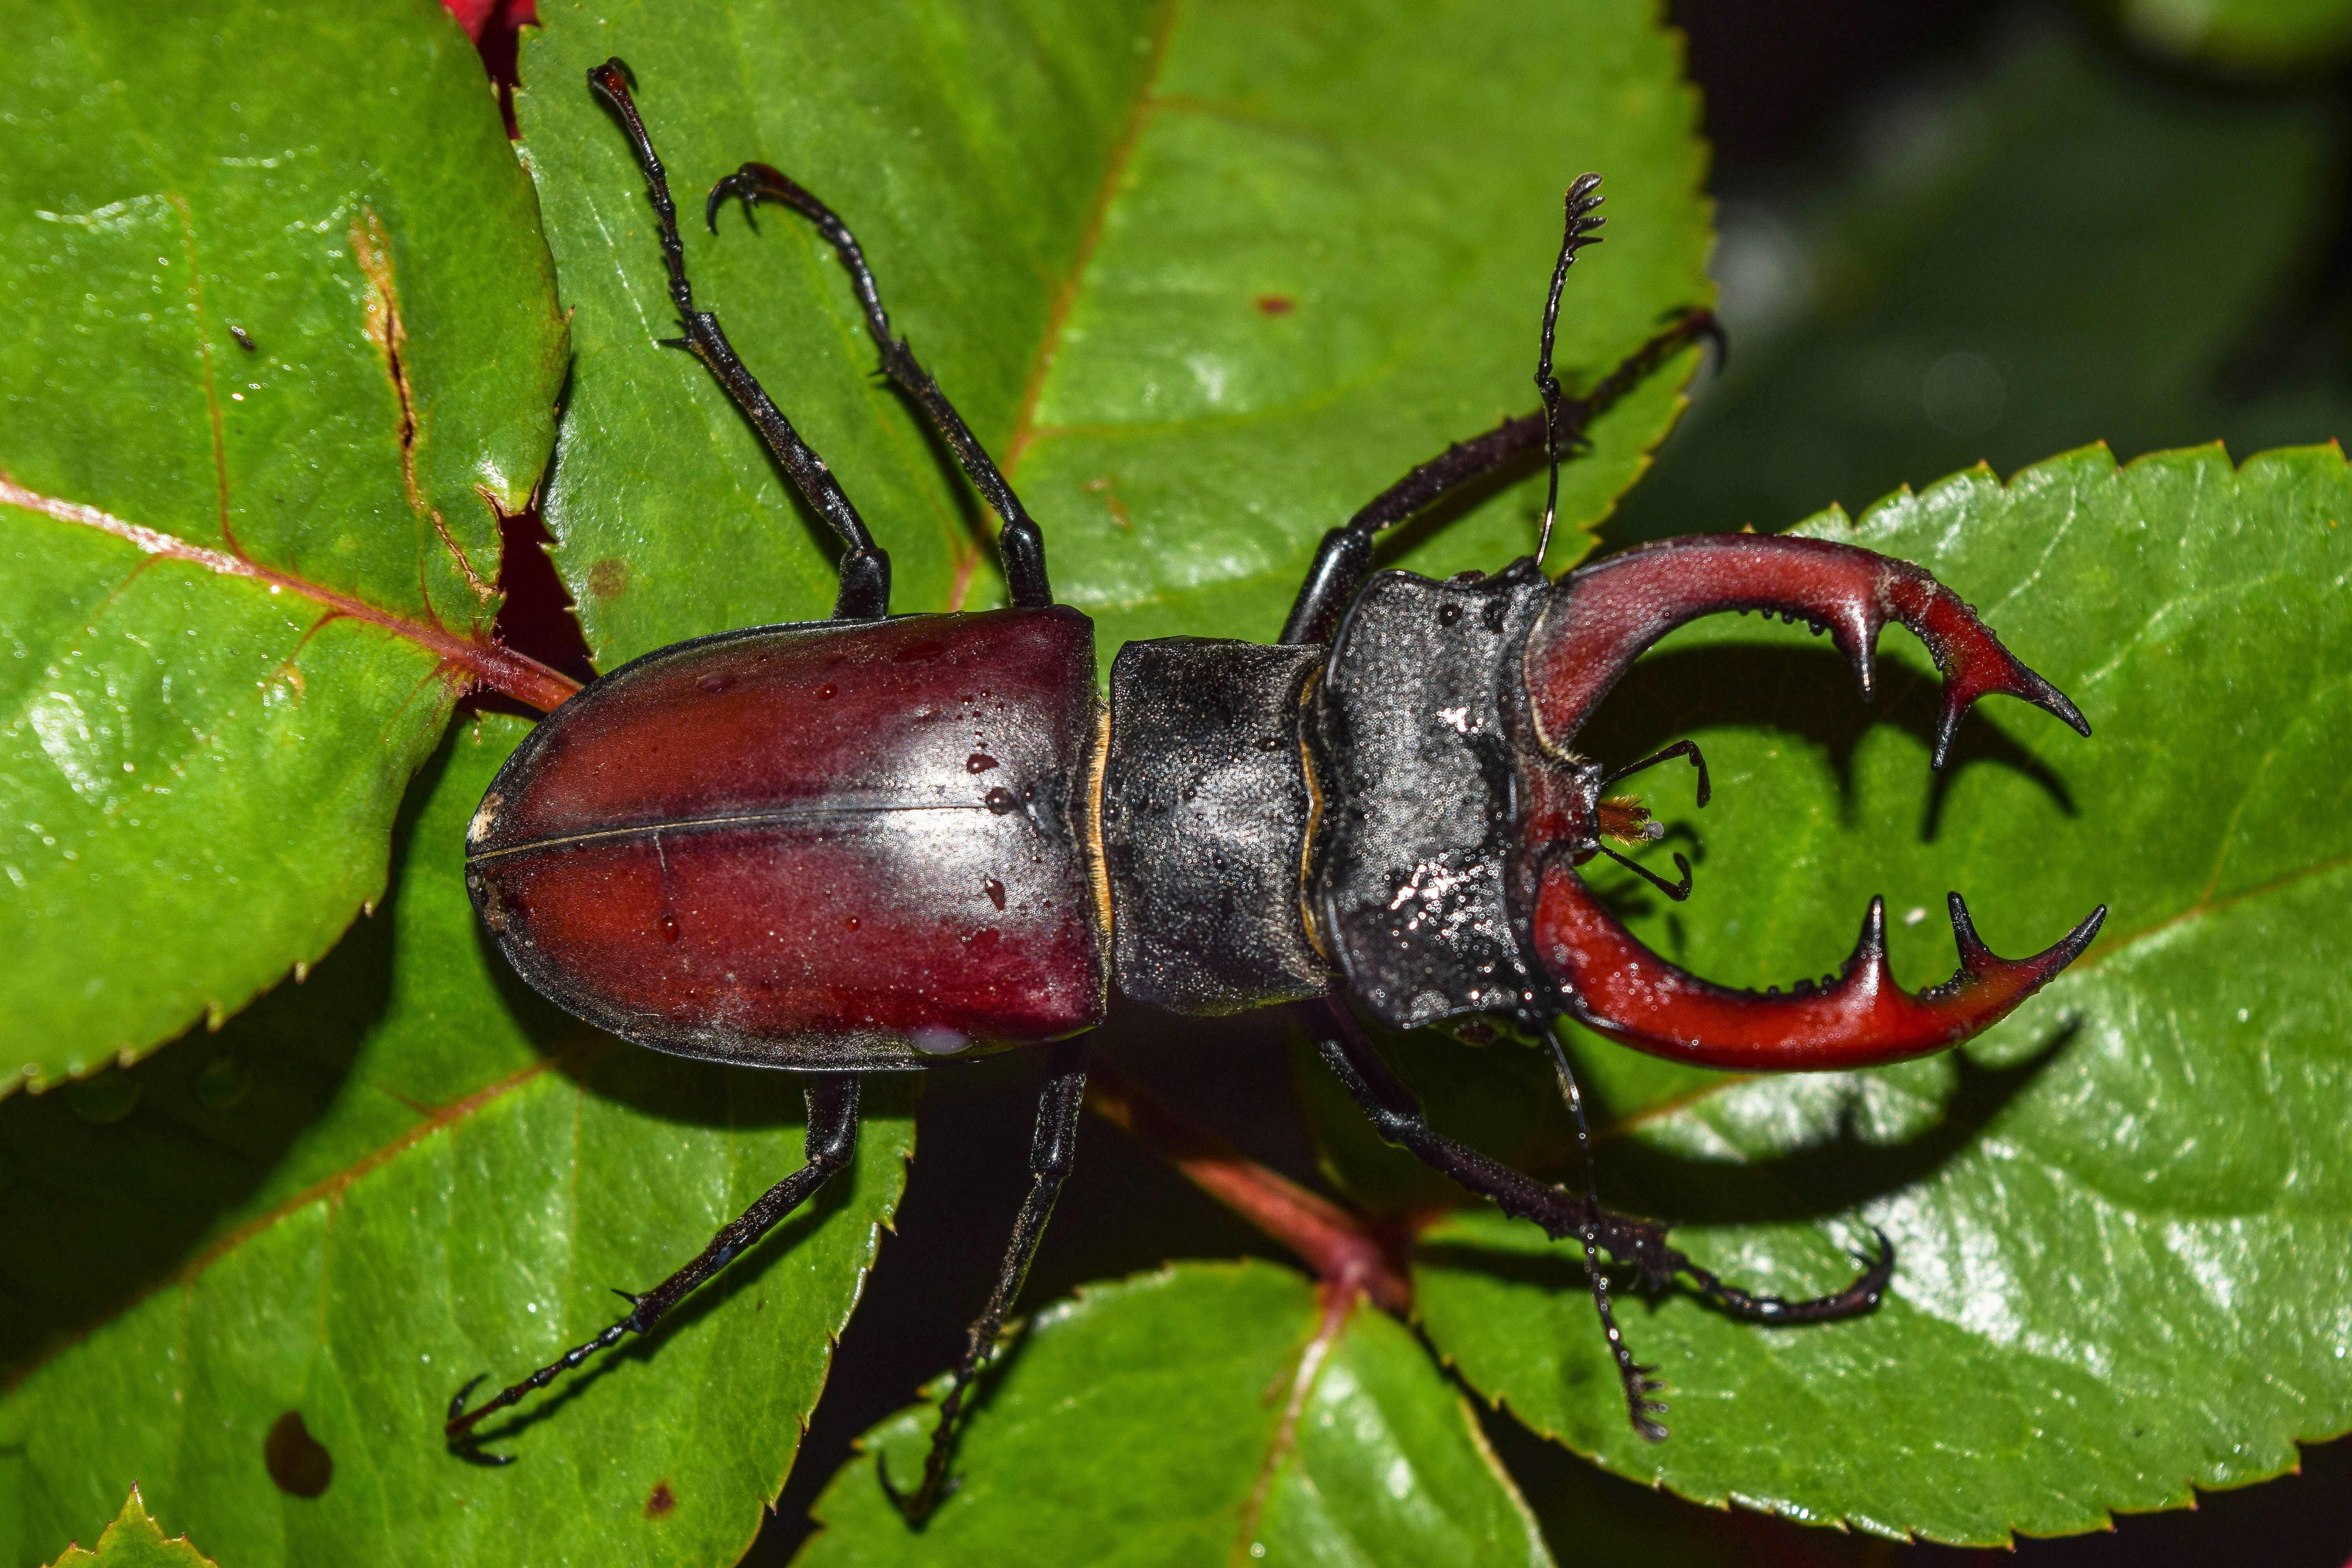 Extinct species of insects in Ukraine. Stag beetle. A very rare phenomenon that I was once lucky enought to capture.